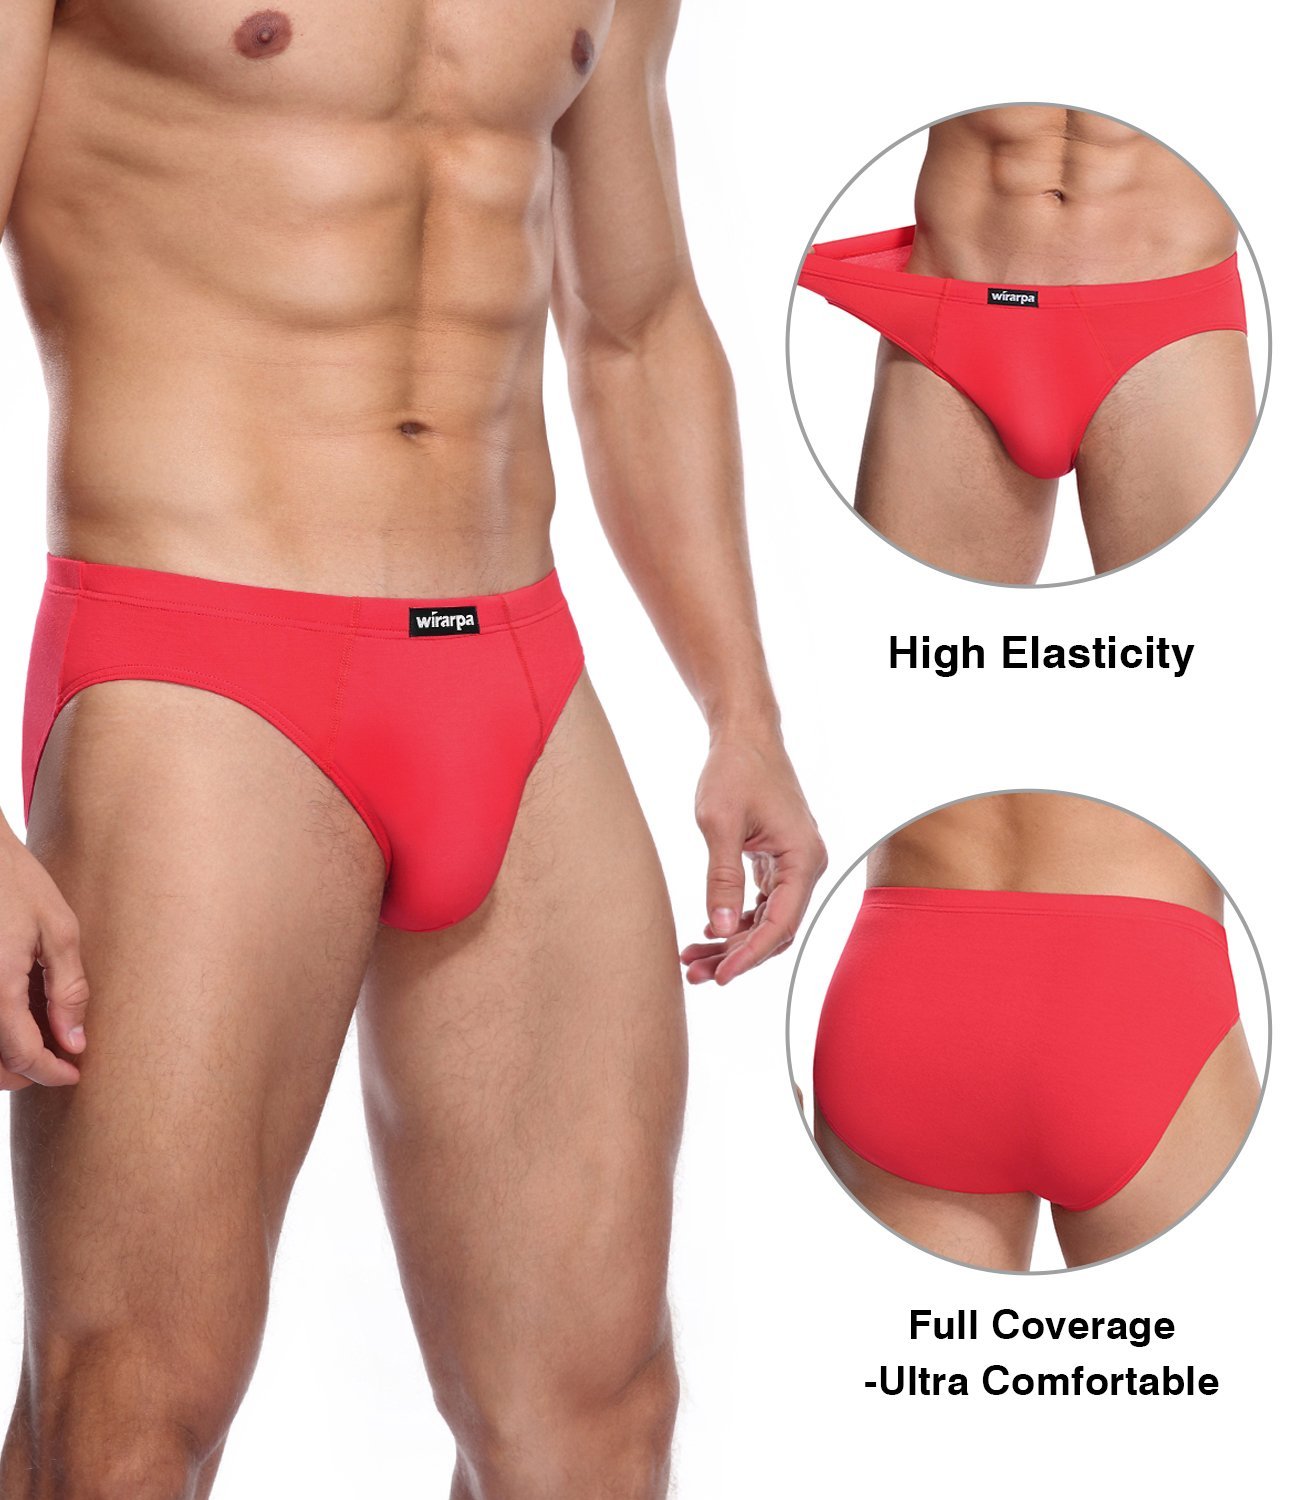 What's the Most Comfortable Underwear for Men in 2022? – Wirarpa Apparel,  Inc.